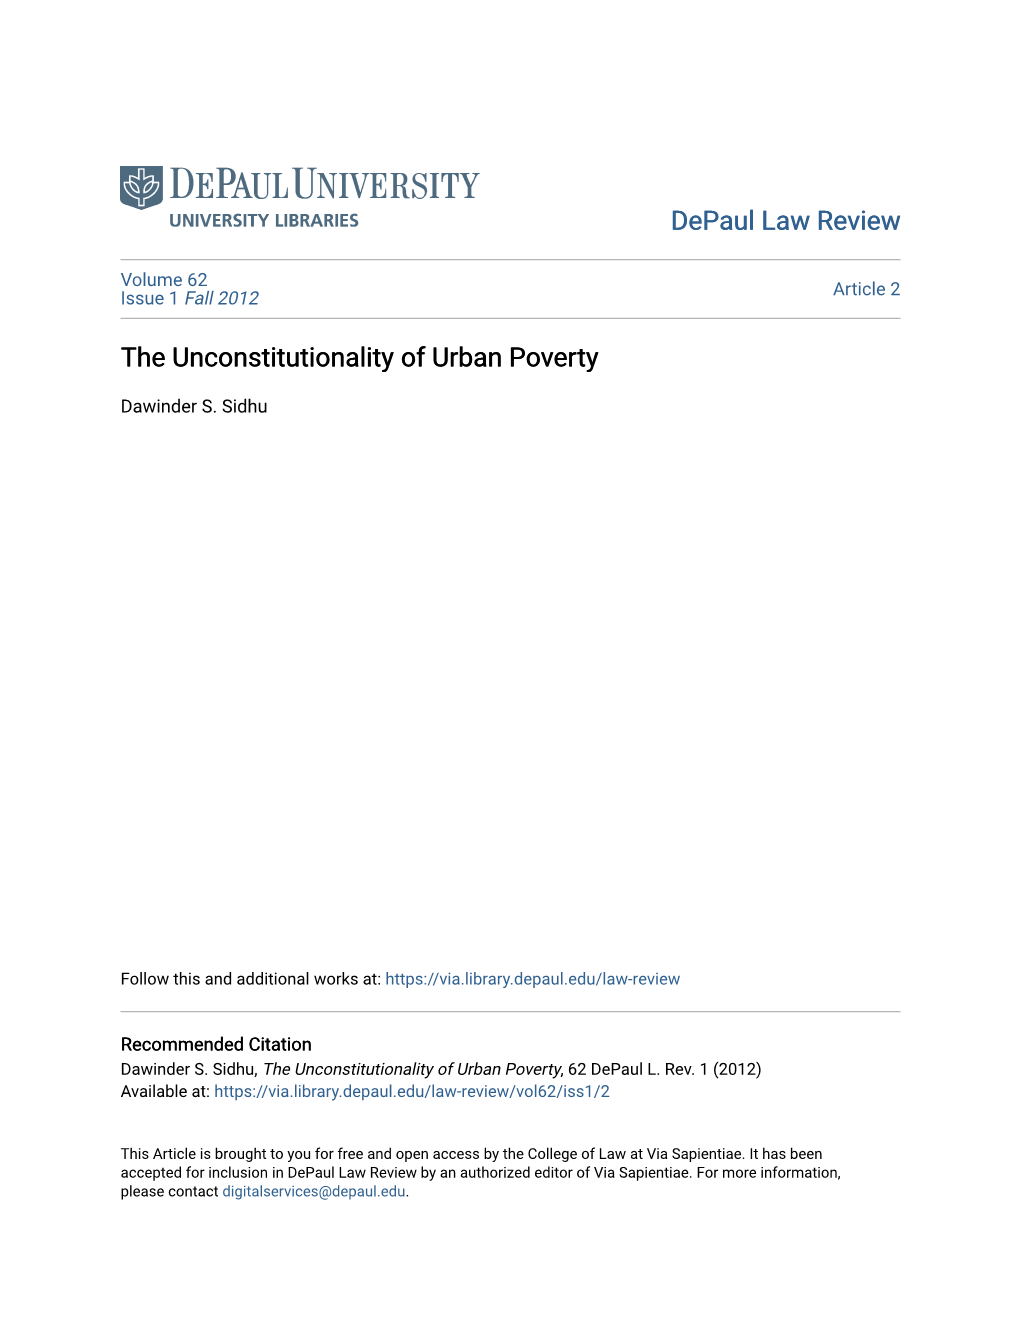 The Unconstitutionality of Urban Poverty